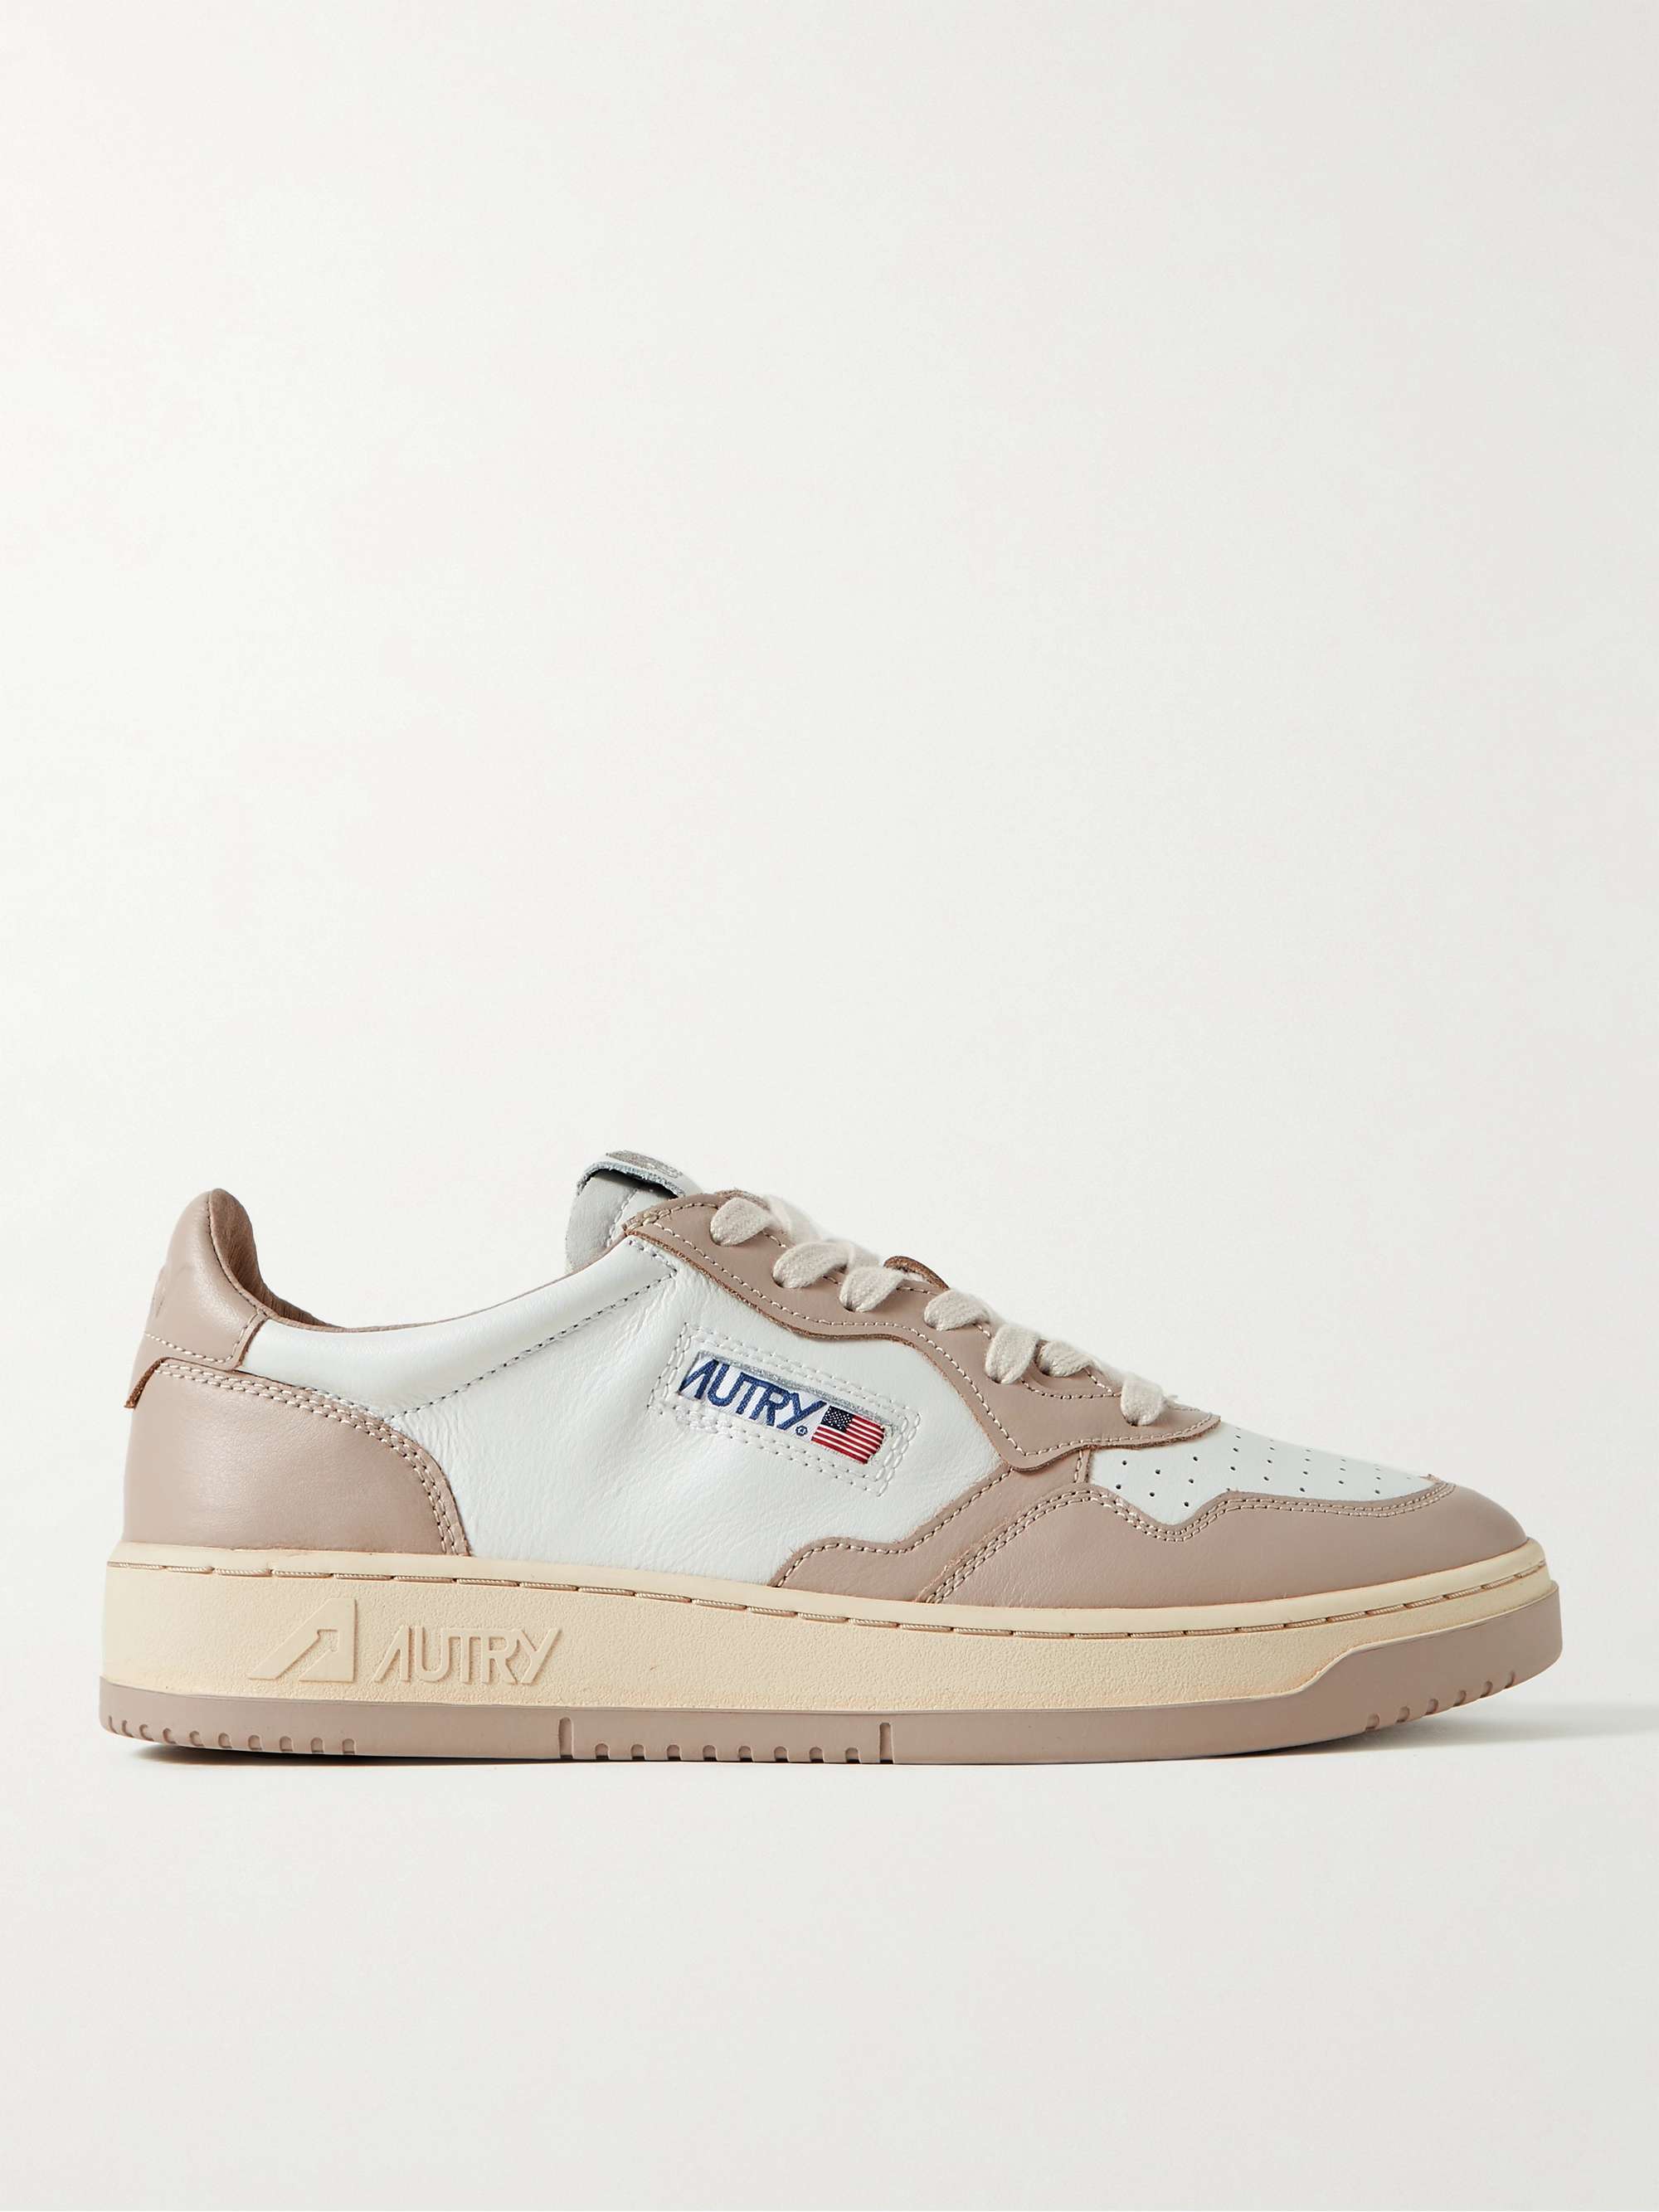 AUTRY Medalist Low Two-Tone Leather Sneakers for Men | MR PORTER